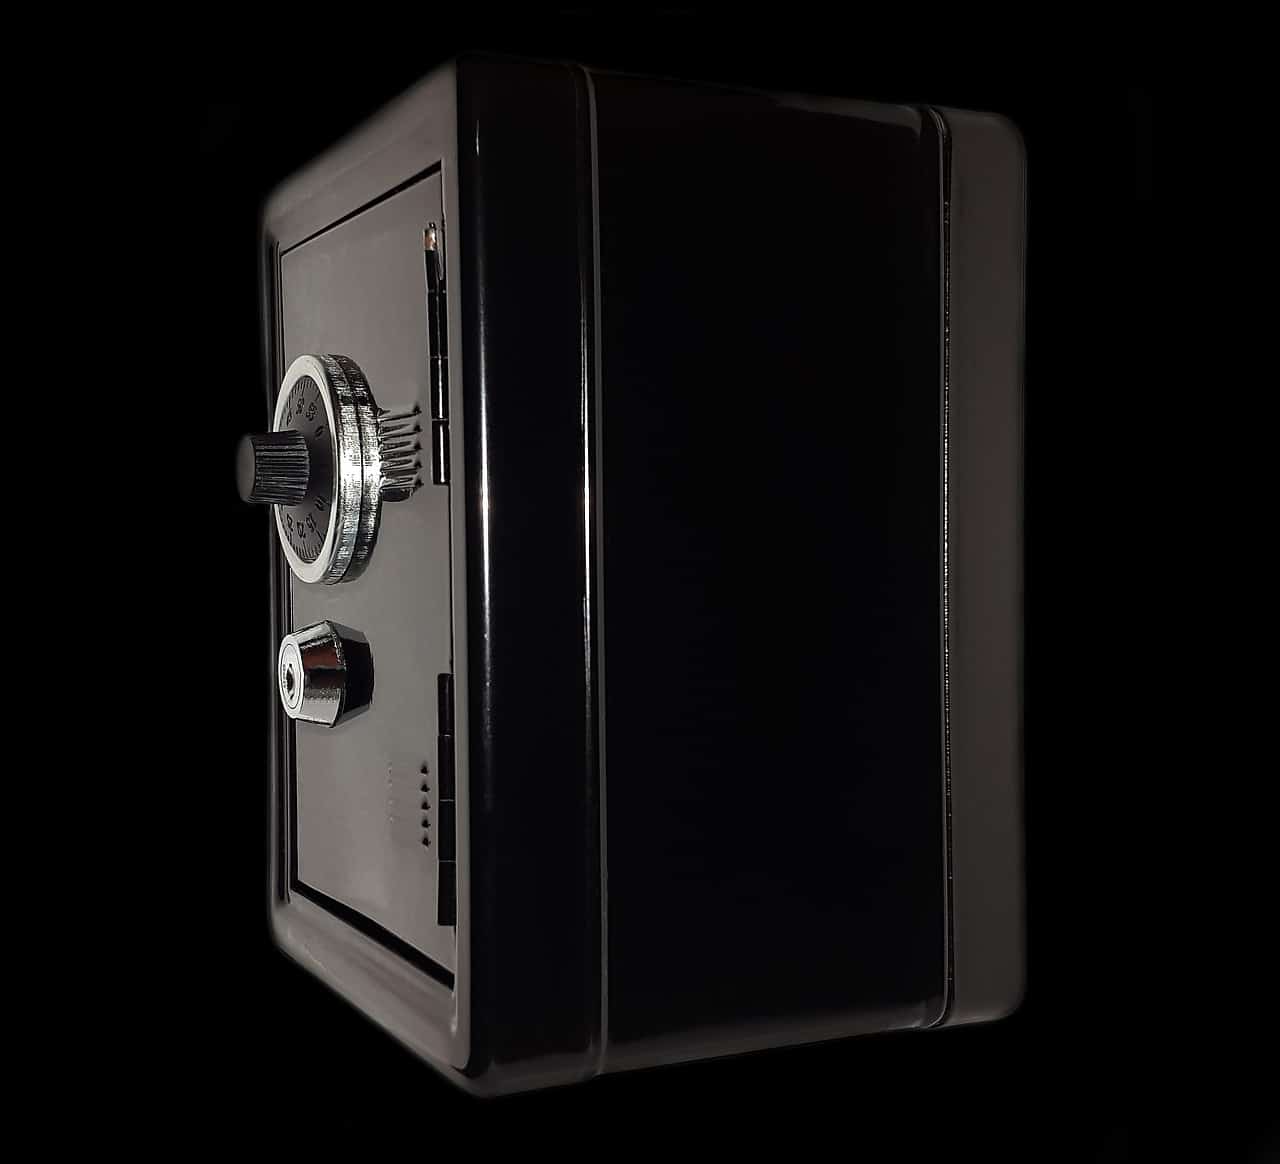 how to choose a home safe, home safe how to, what type of safe do i need, types of safes